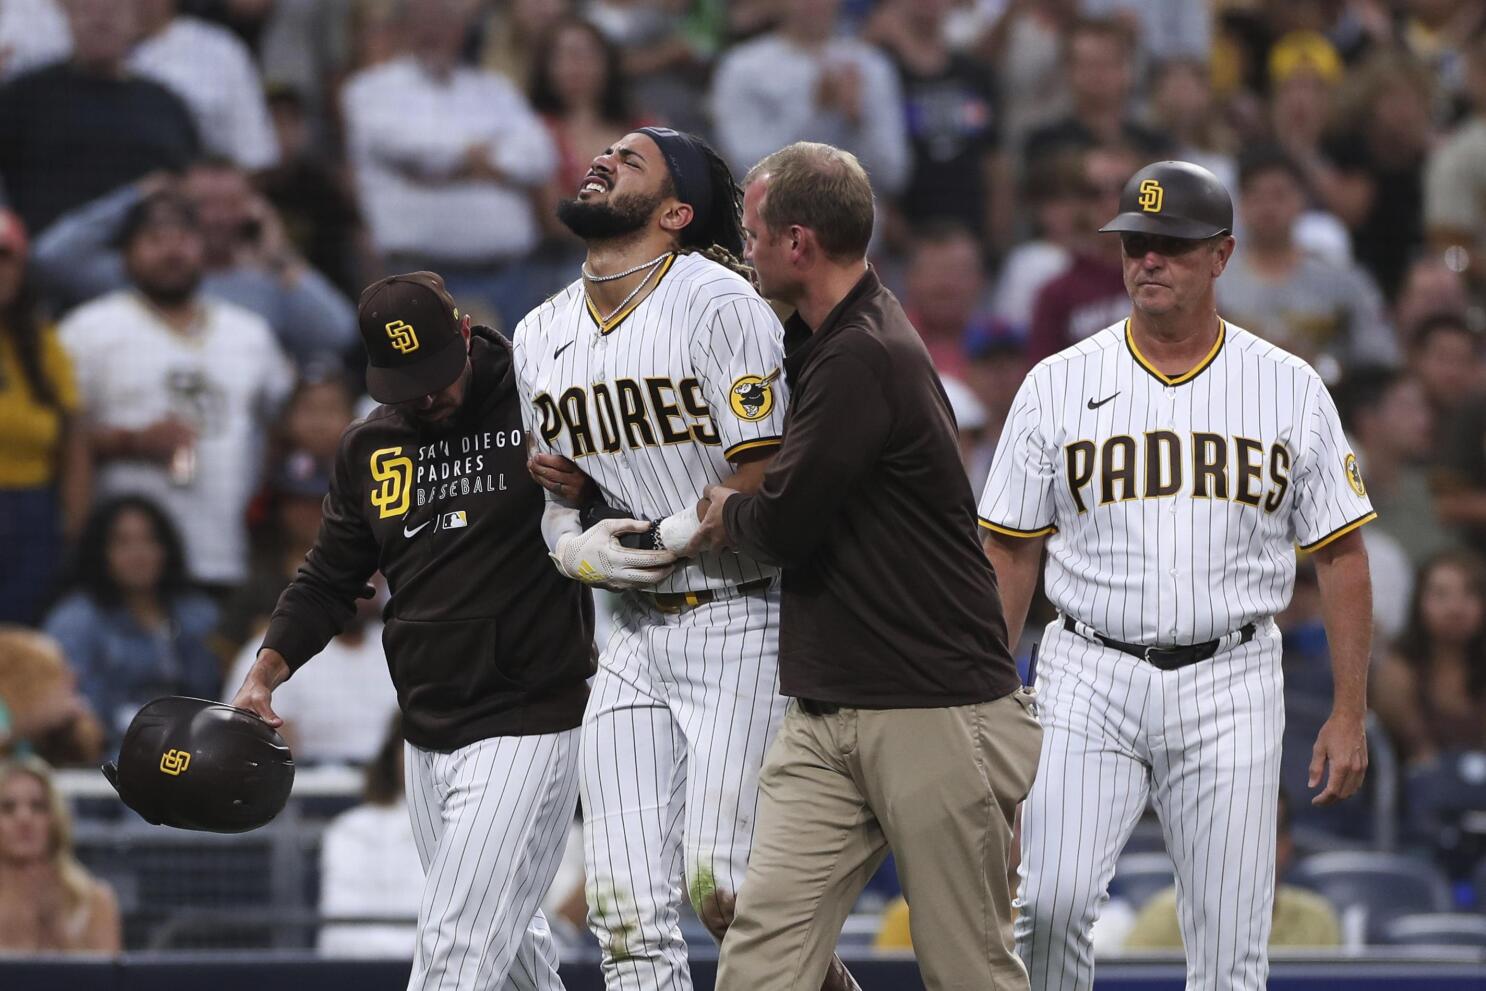 Padres' Fernando Tatis Jr. goes on injured list due to health, safety  protocols before Rockies game – The Denver Post